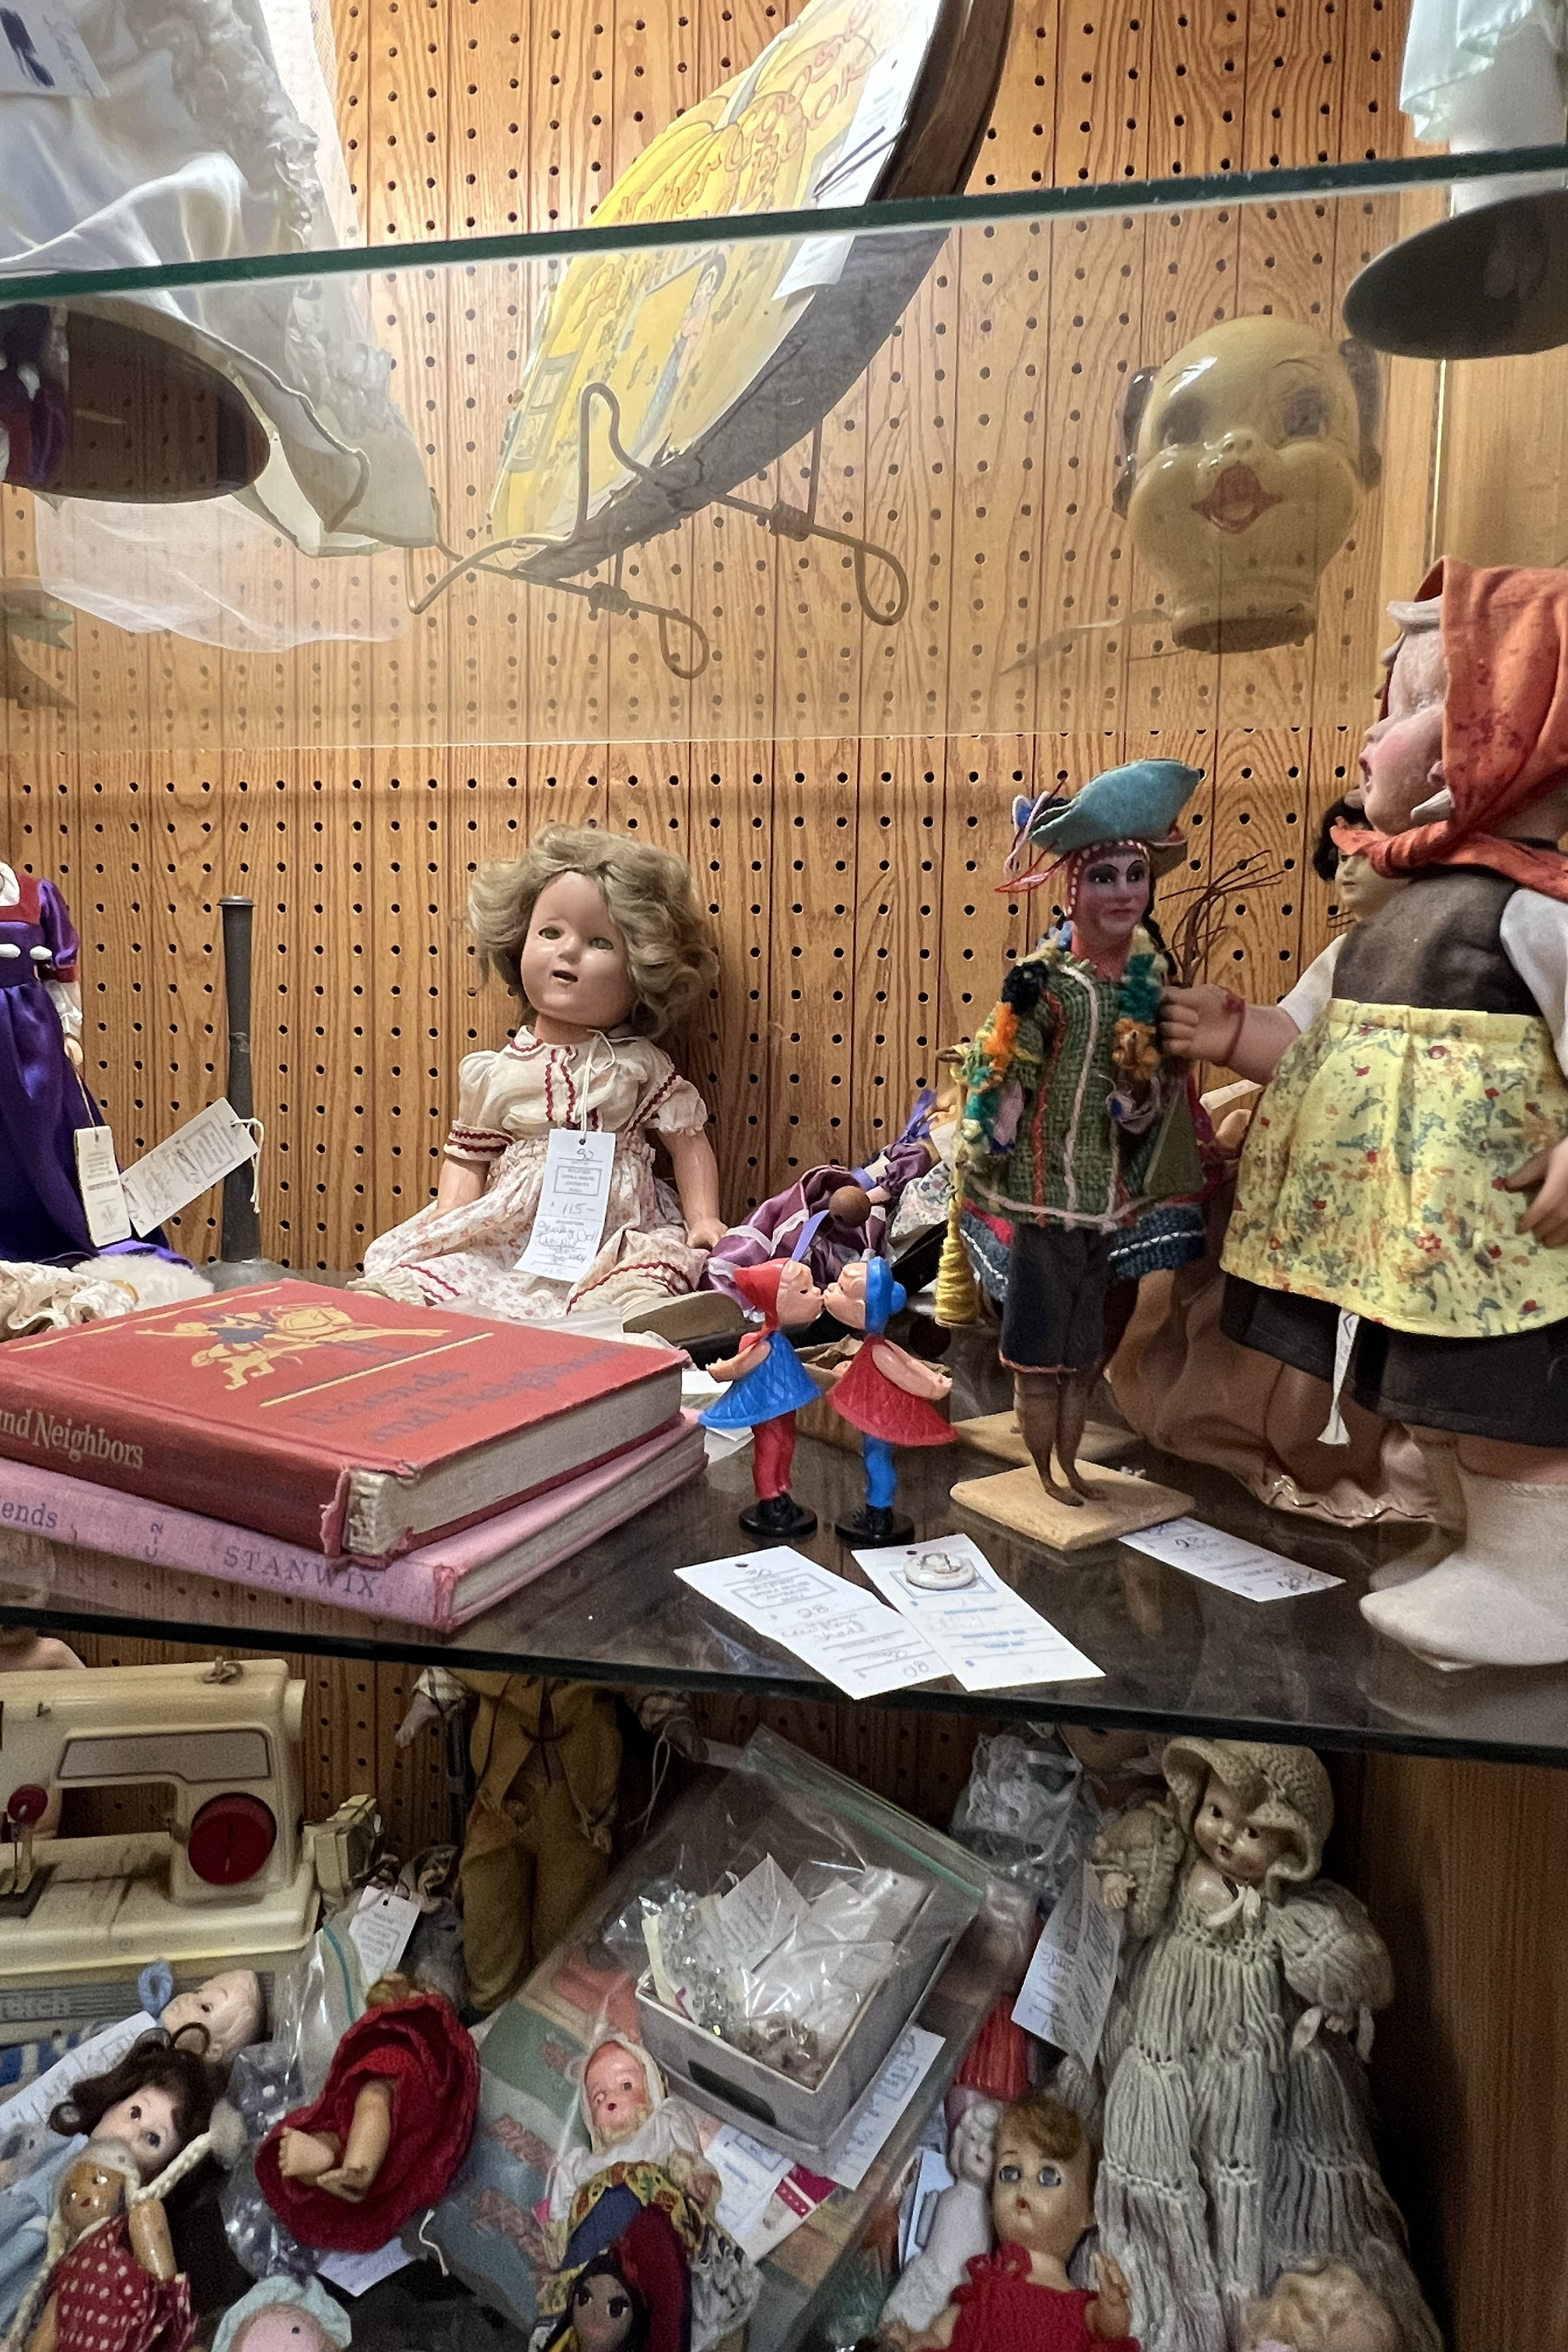 One section of the store is dedicated to creepy dolls